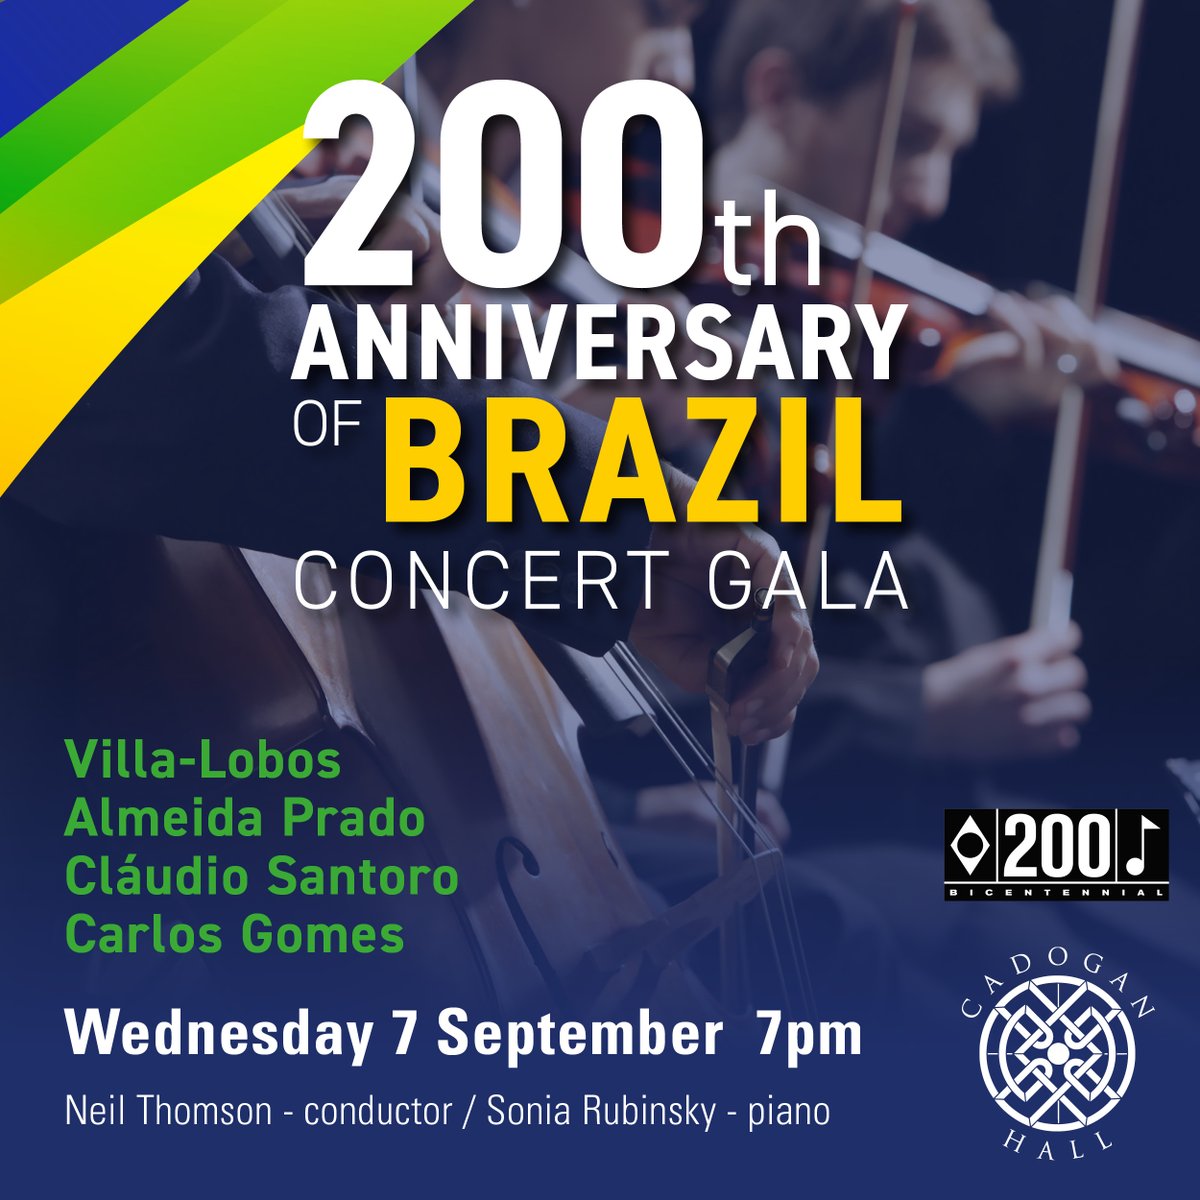 Discover the rich culture of Brazilian classical music with us at @cadoganhall this 7th September. Tickets available from £10. cadoganhall.com/whats-on/engli… @neilthomson20 @soniarubinsky